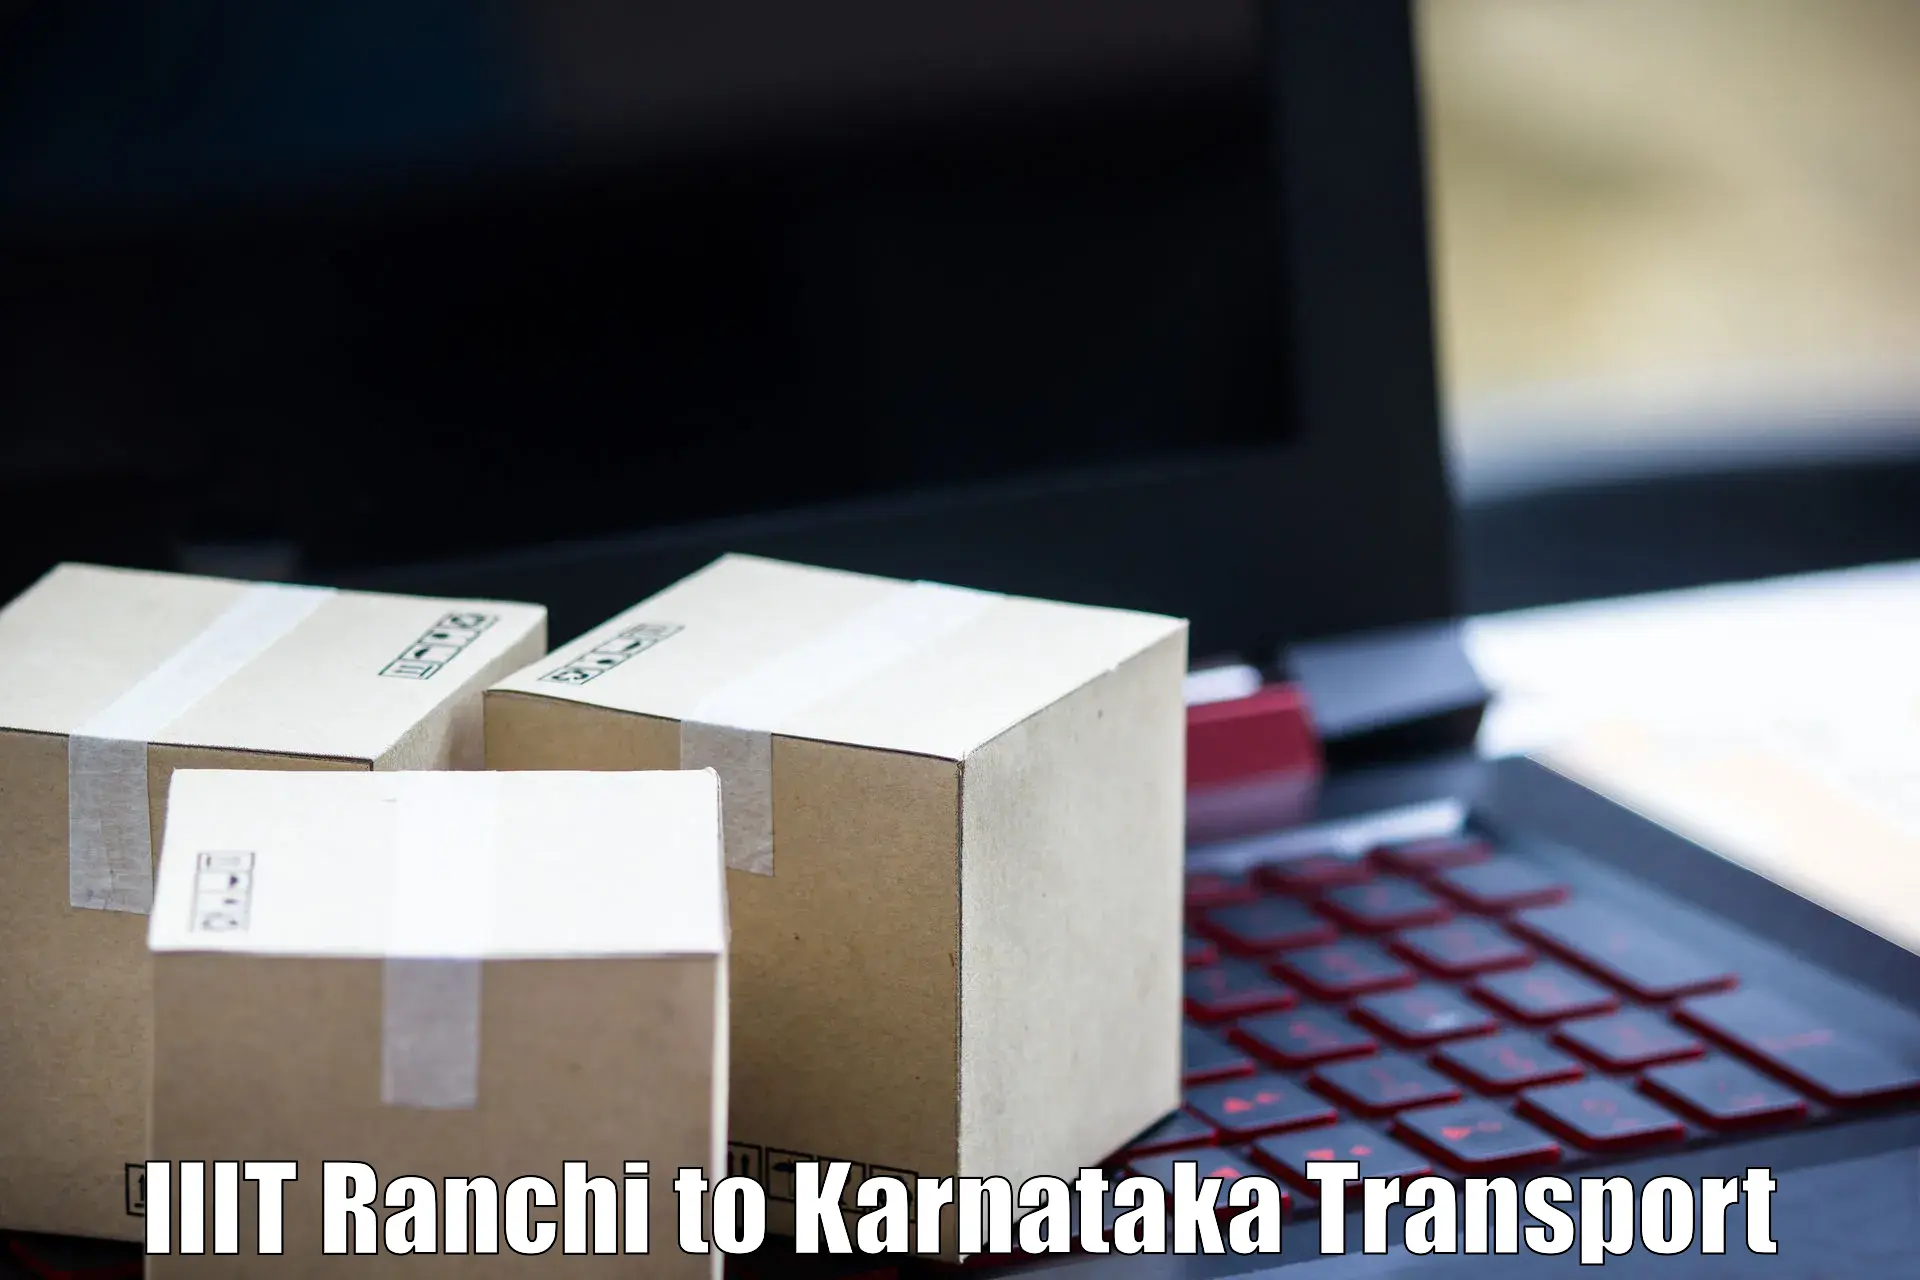 International cargo transportation services IIIT Ranchi to Chikmagalur